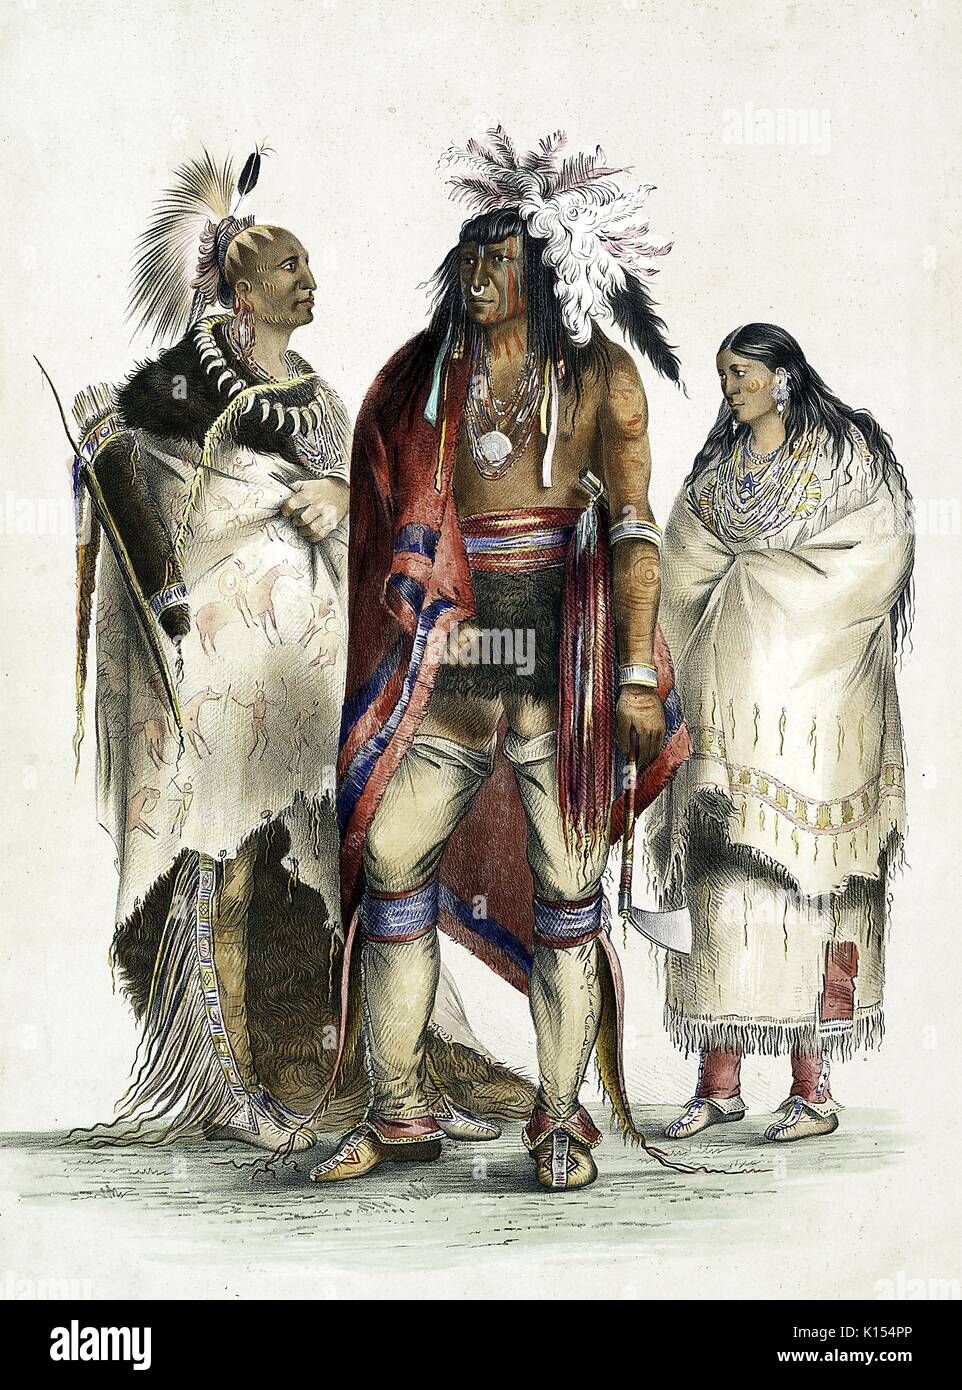 Three Native Americans in traditional dress, illustration, 1888. From the New York Public Library. Stock Photo